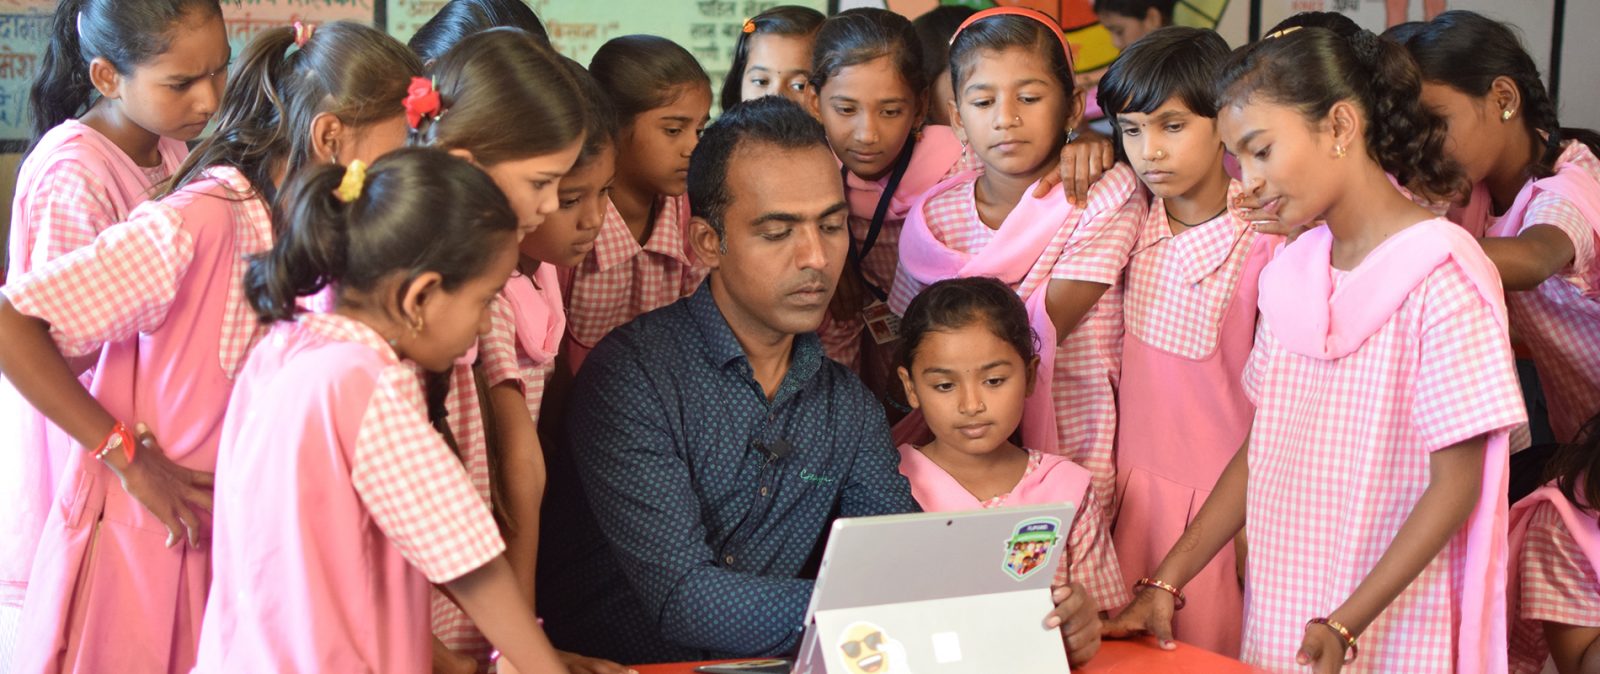 A group of children and a man huddled around a laptop